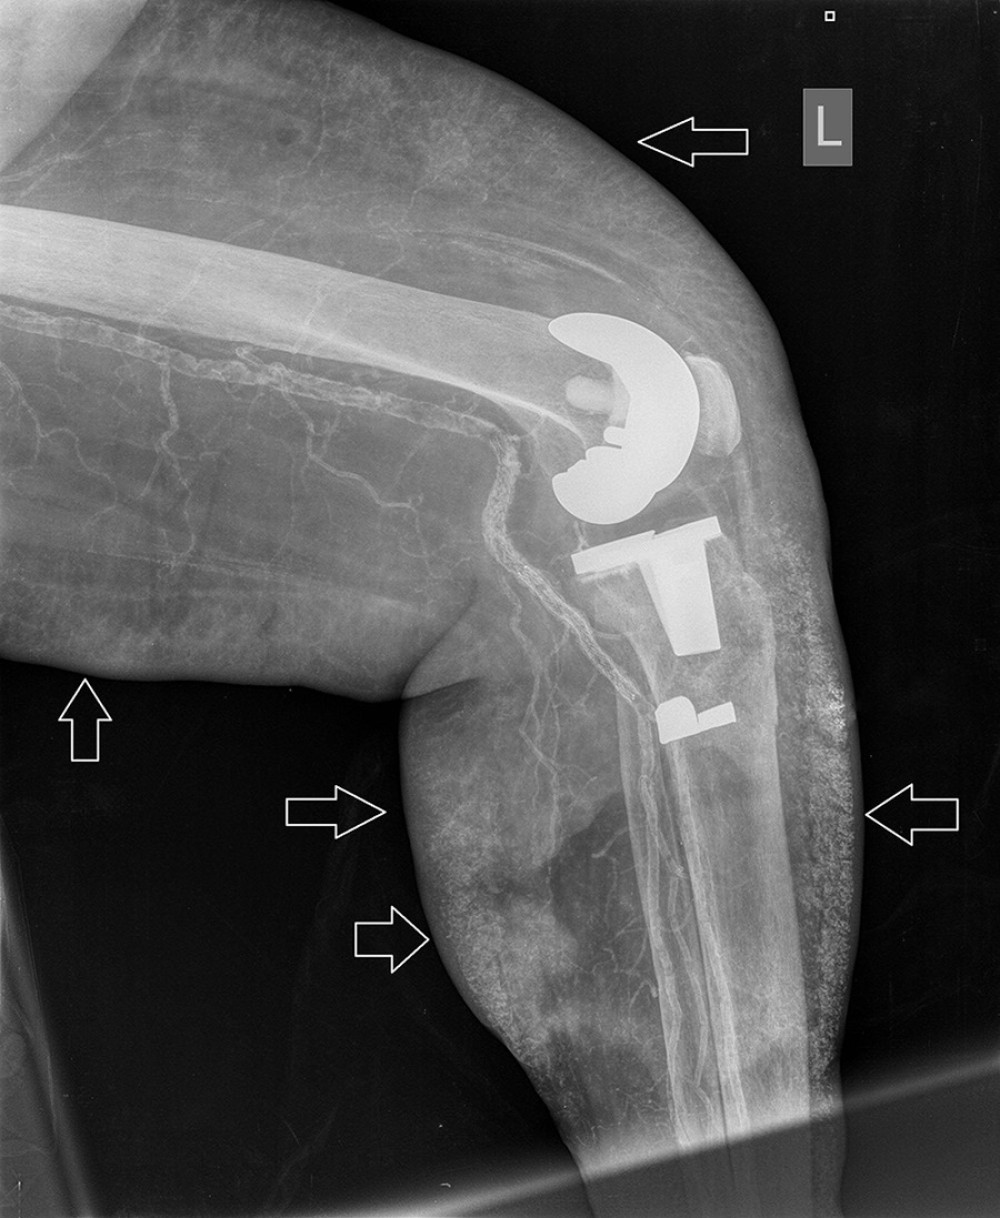 The X-ray of the lower left extremity showing massive subcutaneous calcifications (arrows).